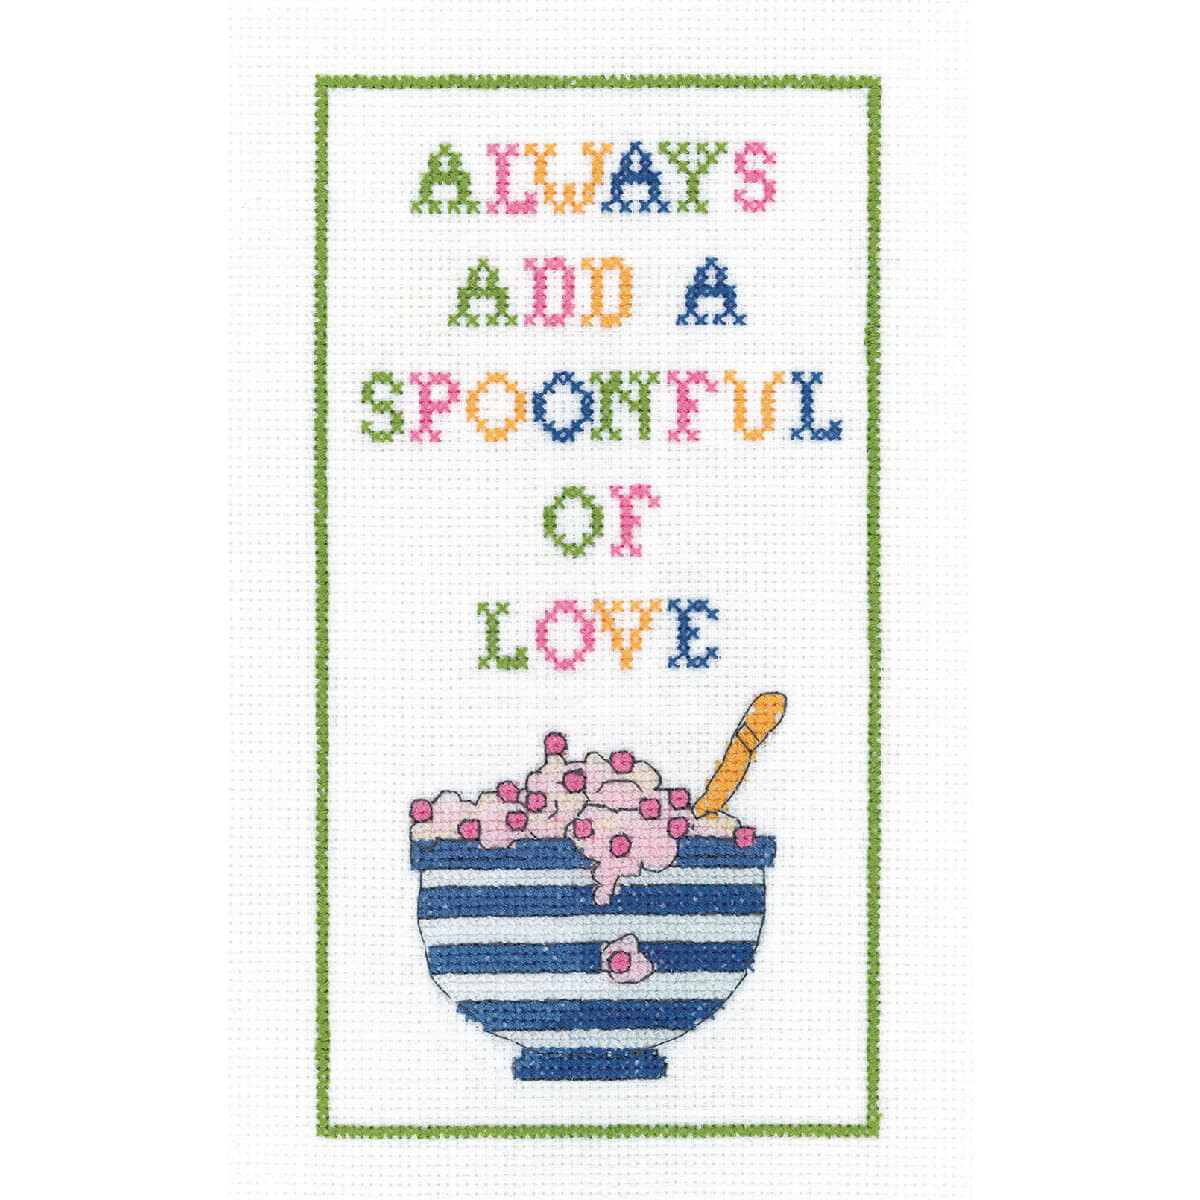 Heritage counted cross stitch kit Aida "Spoonful of...